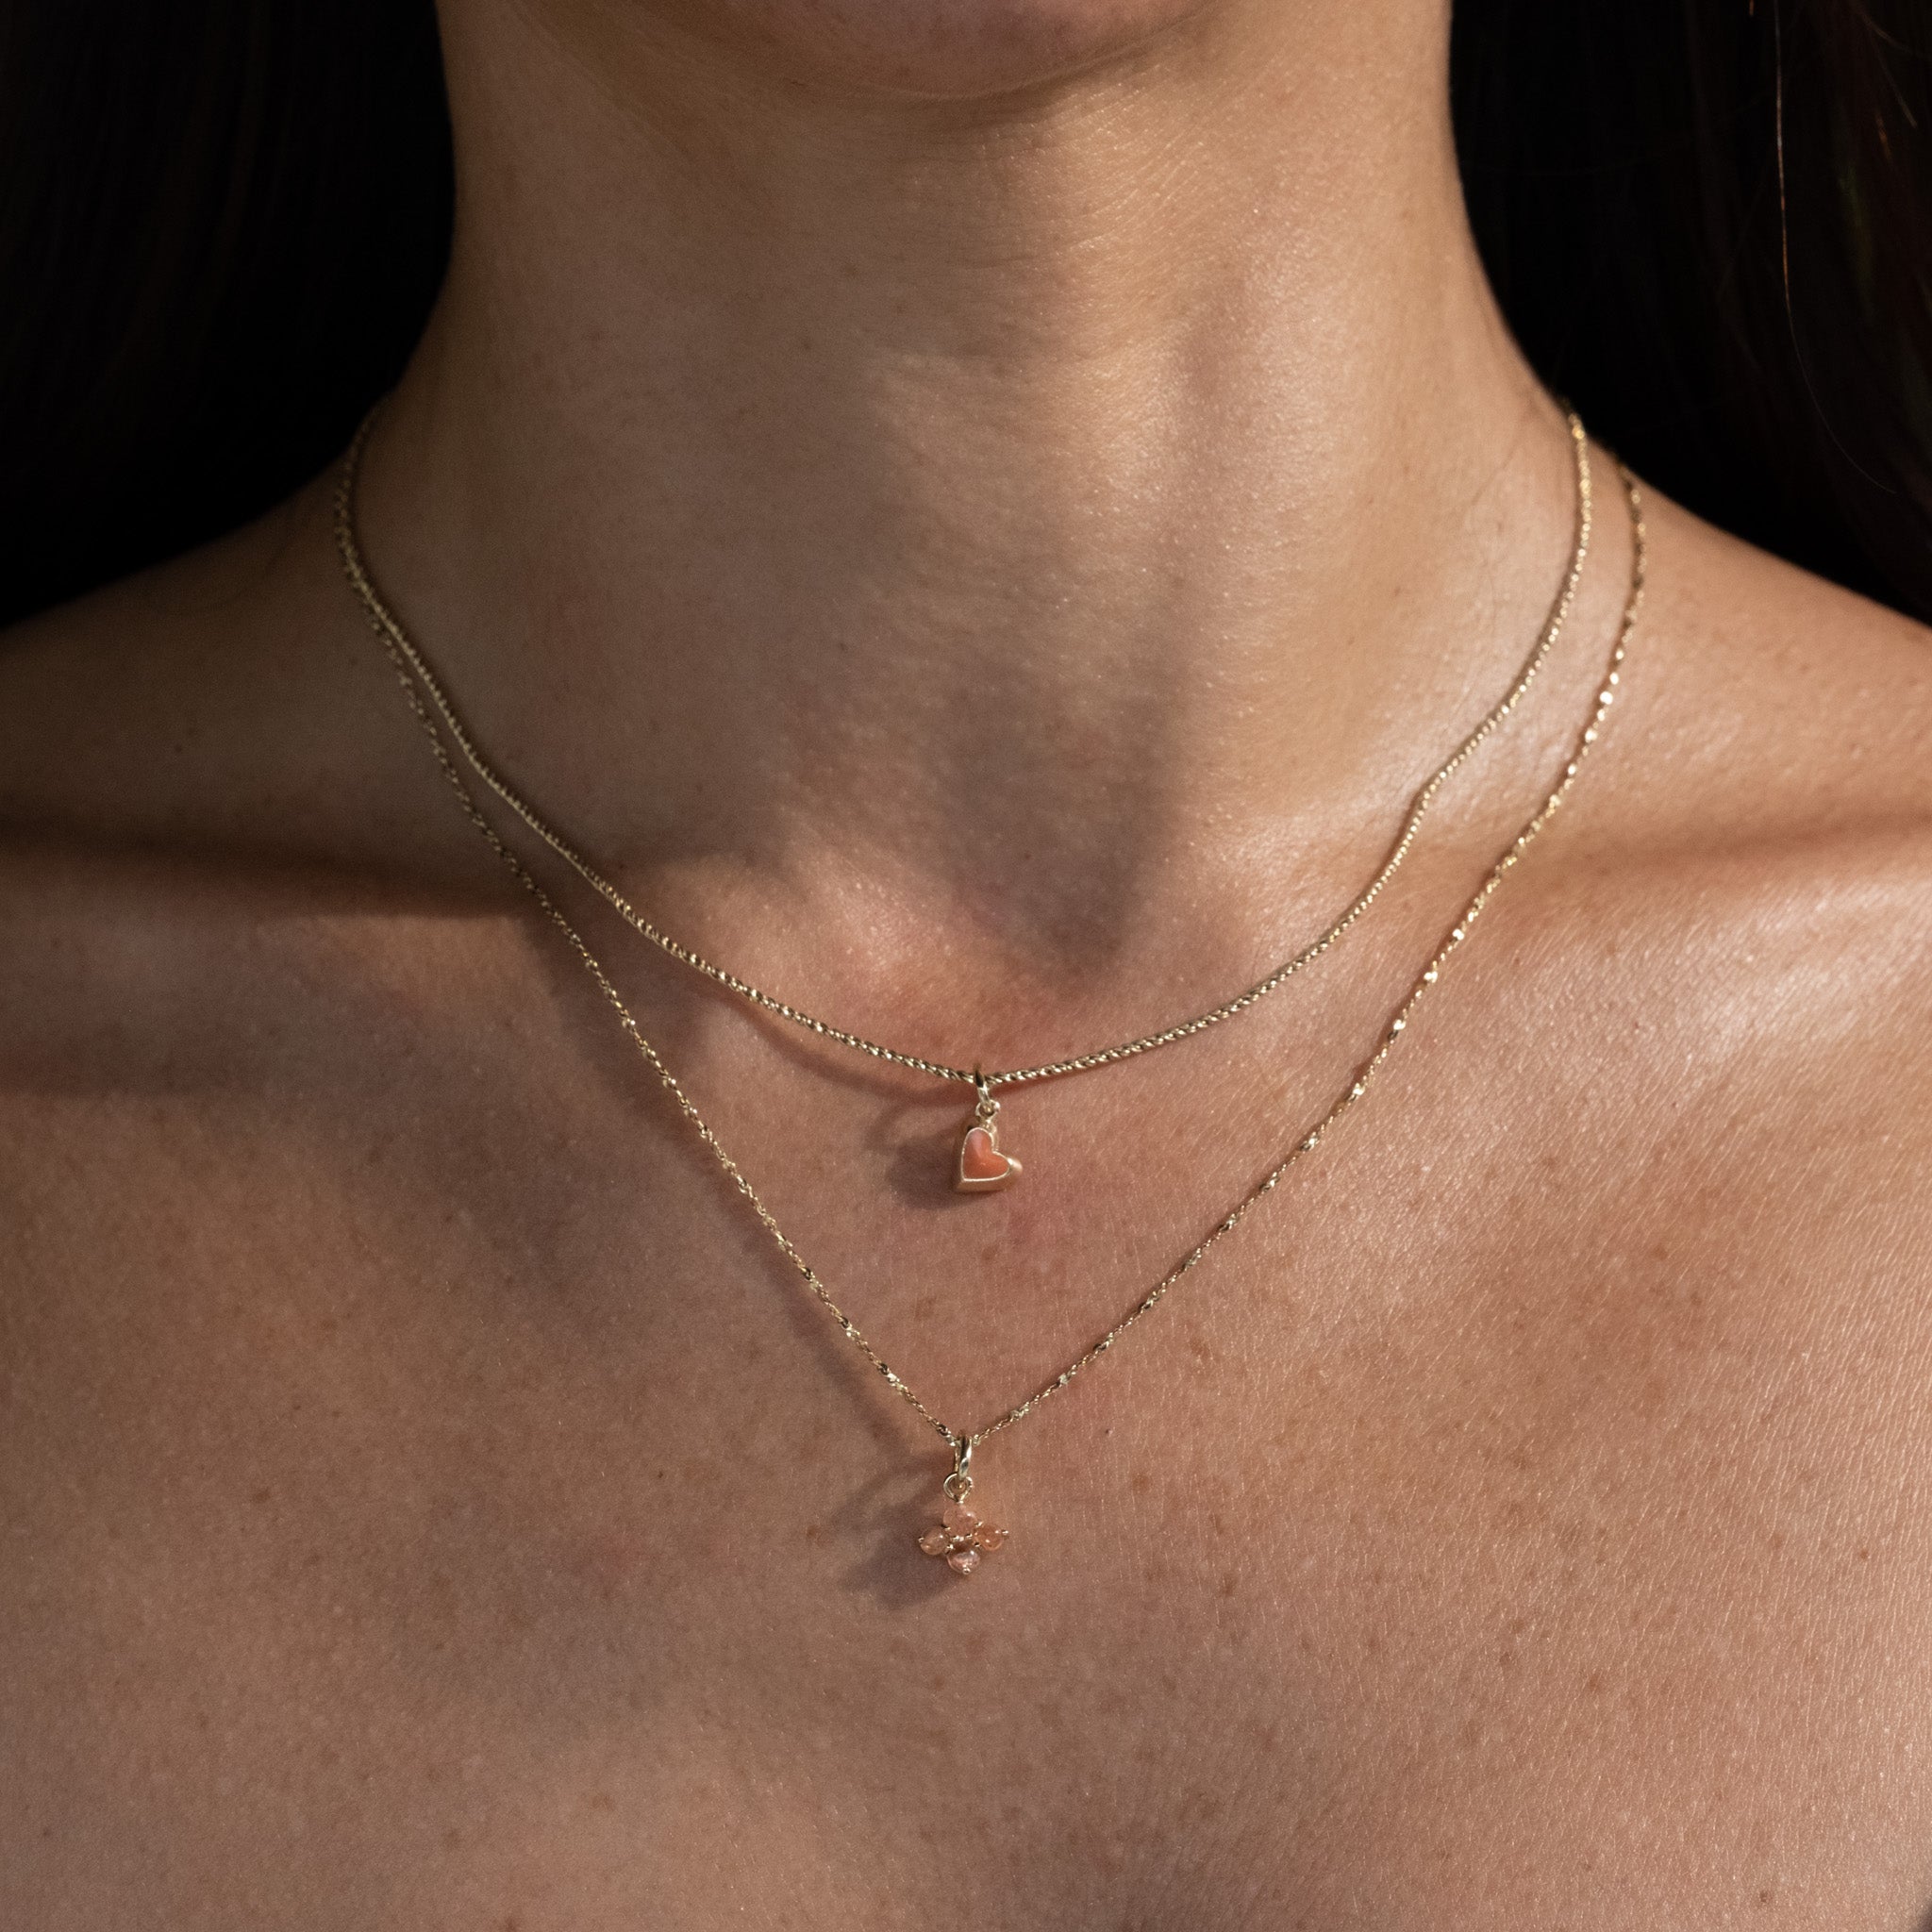 A close up of a woman wearing the Aiden Jae Mini Reversible Heart Charm necklace.